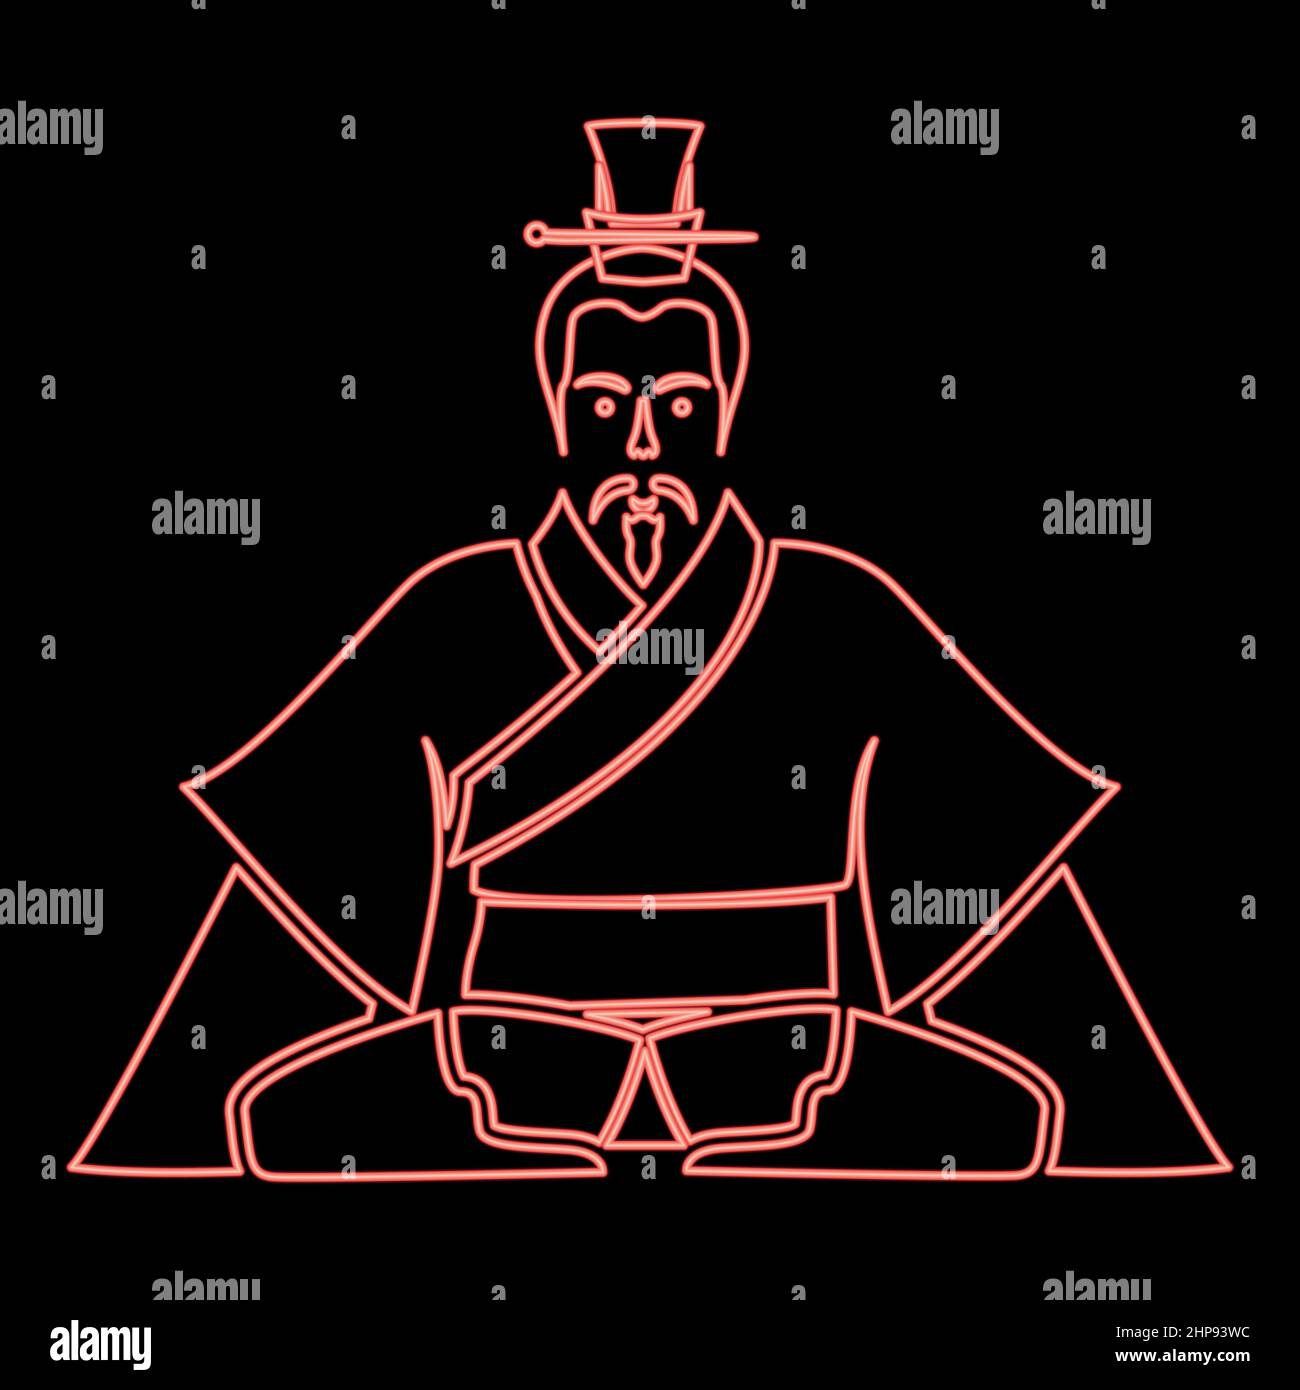 Neon emperor of china black red color vector illustration image flat style Stock Vector